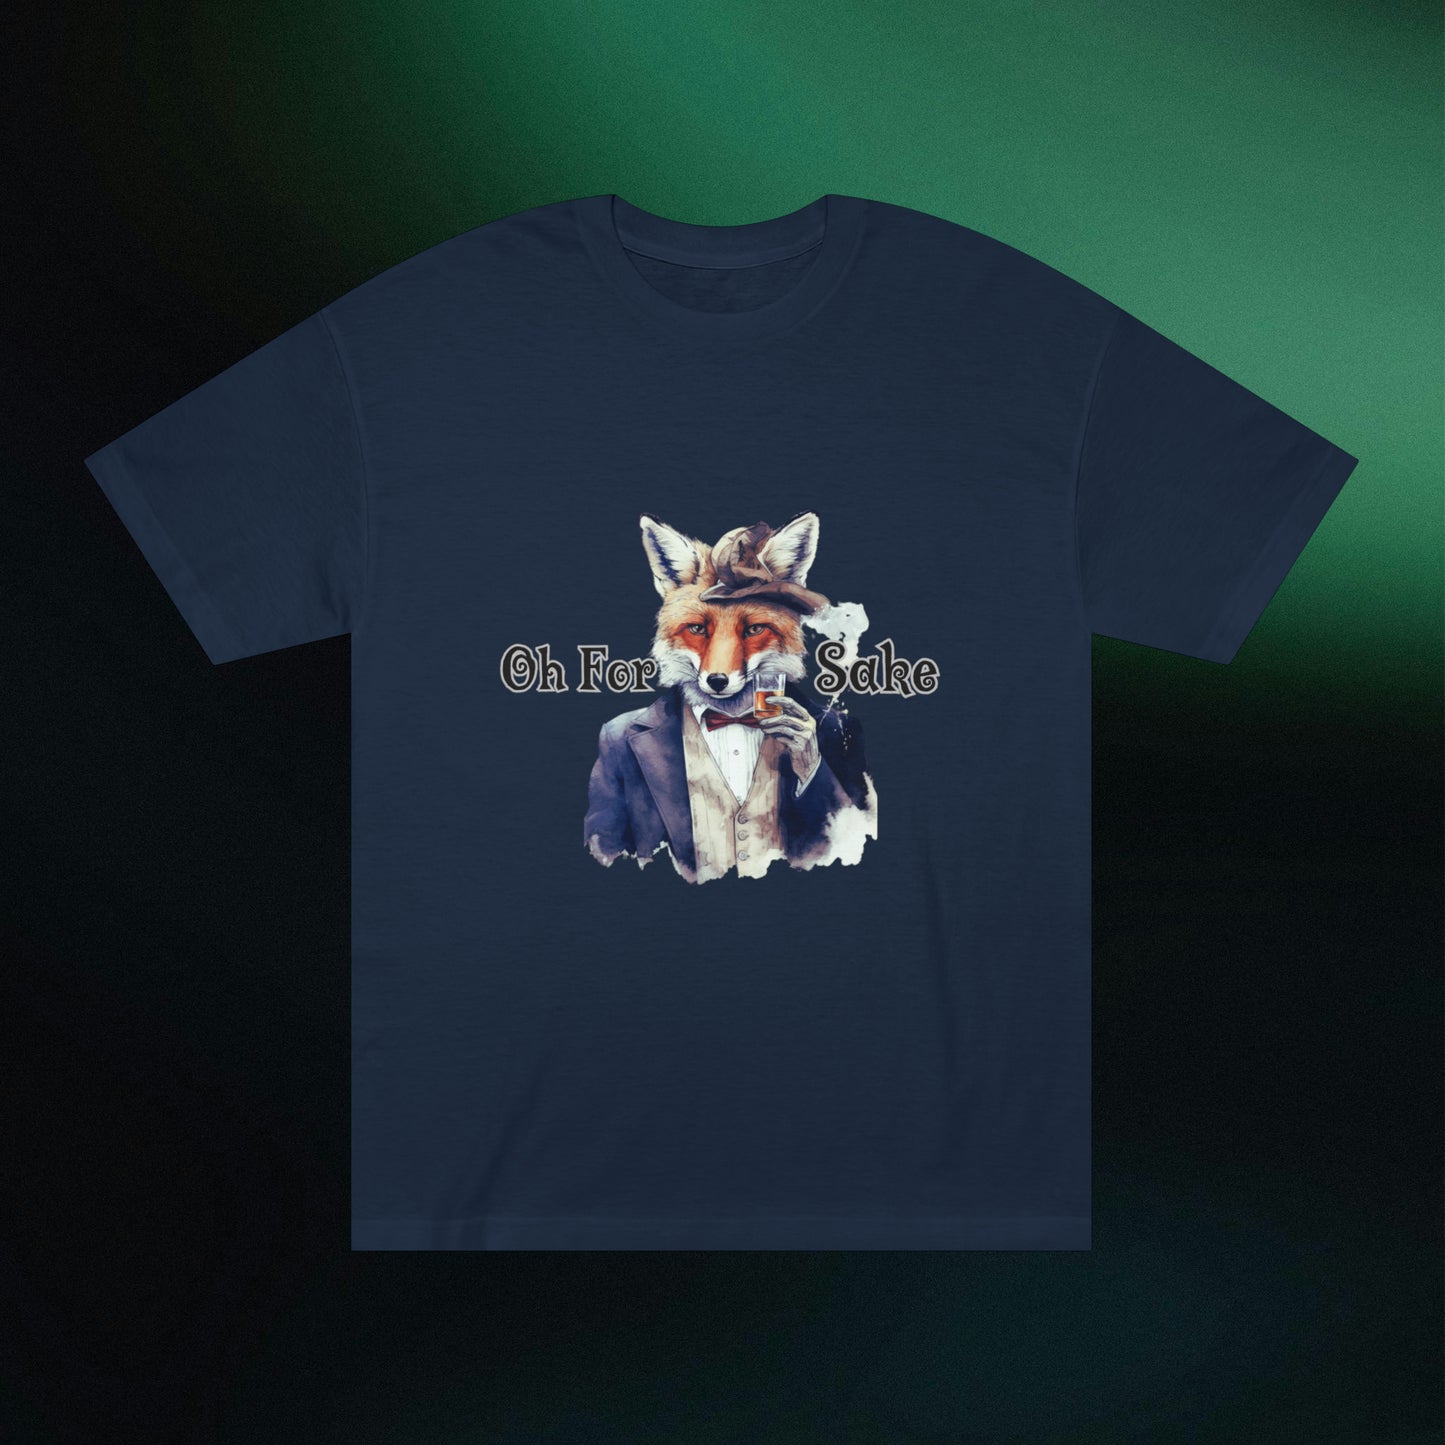 Funny Fox Shirt | Gift for Fox Lover | Animal Lover T-Shirt - Cute Fox Gift for Nature Enthusiasts T-Shirt Navy S 